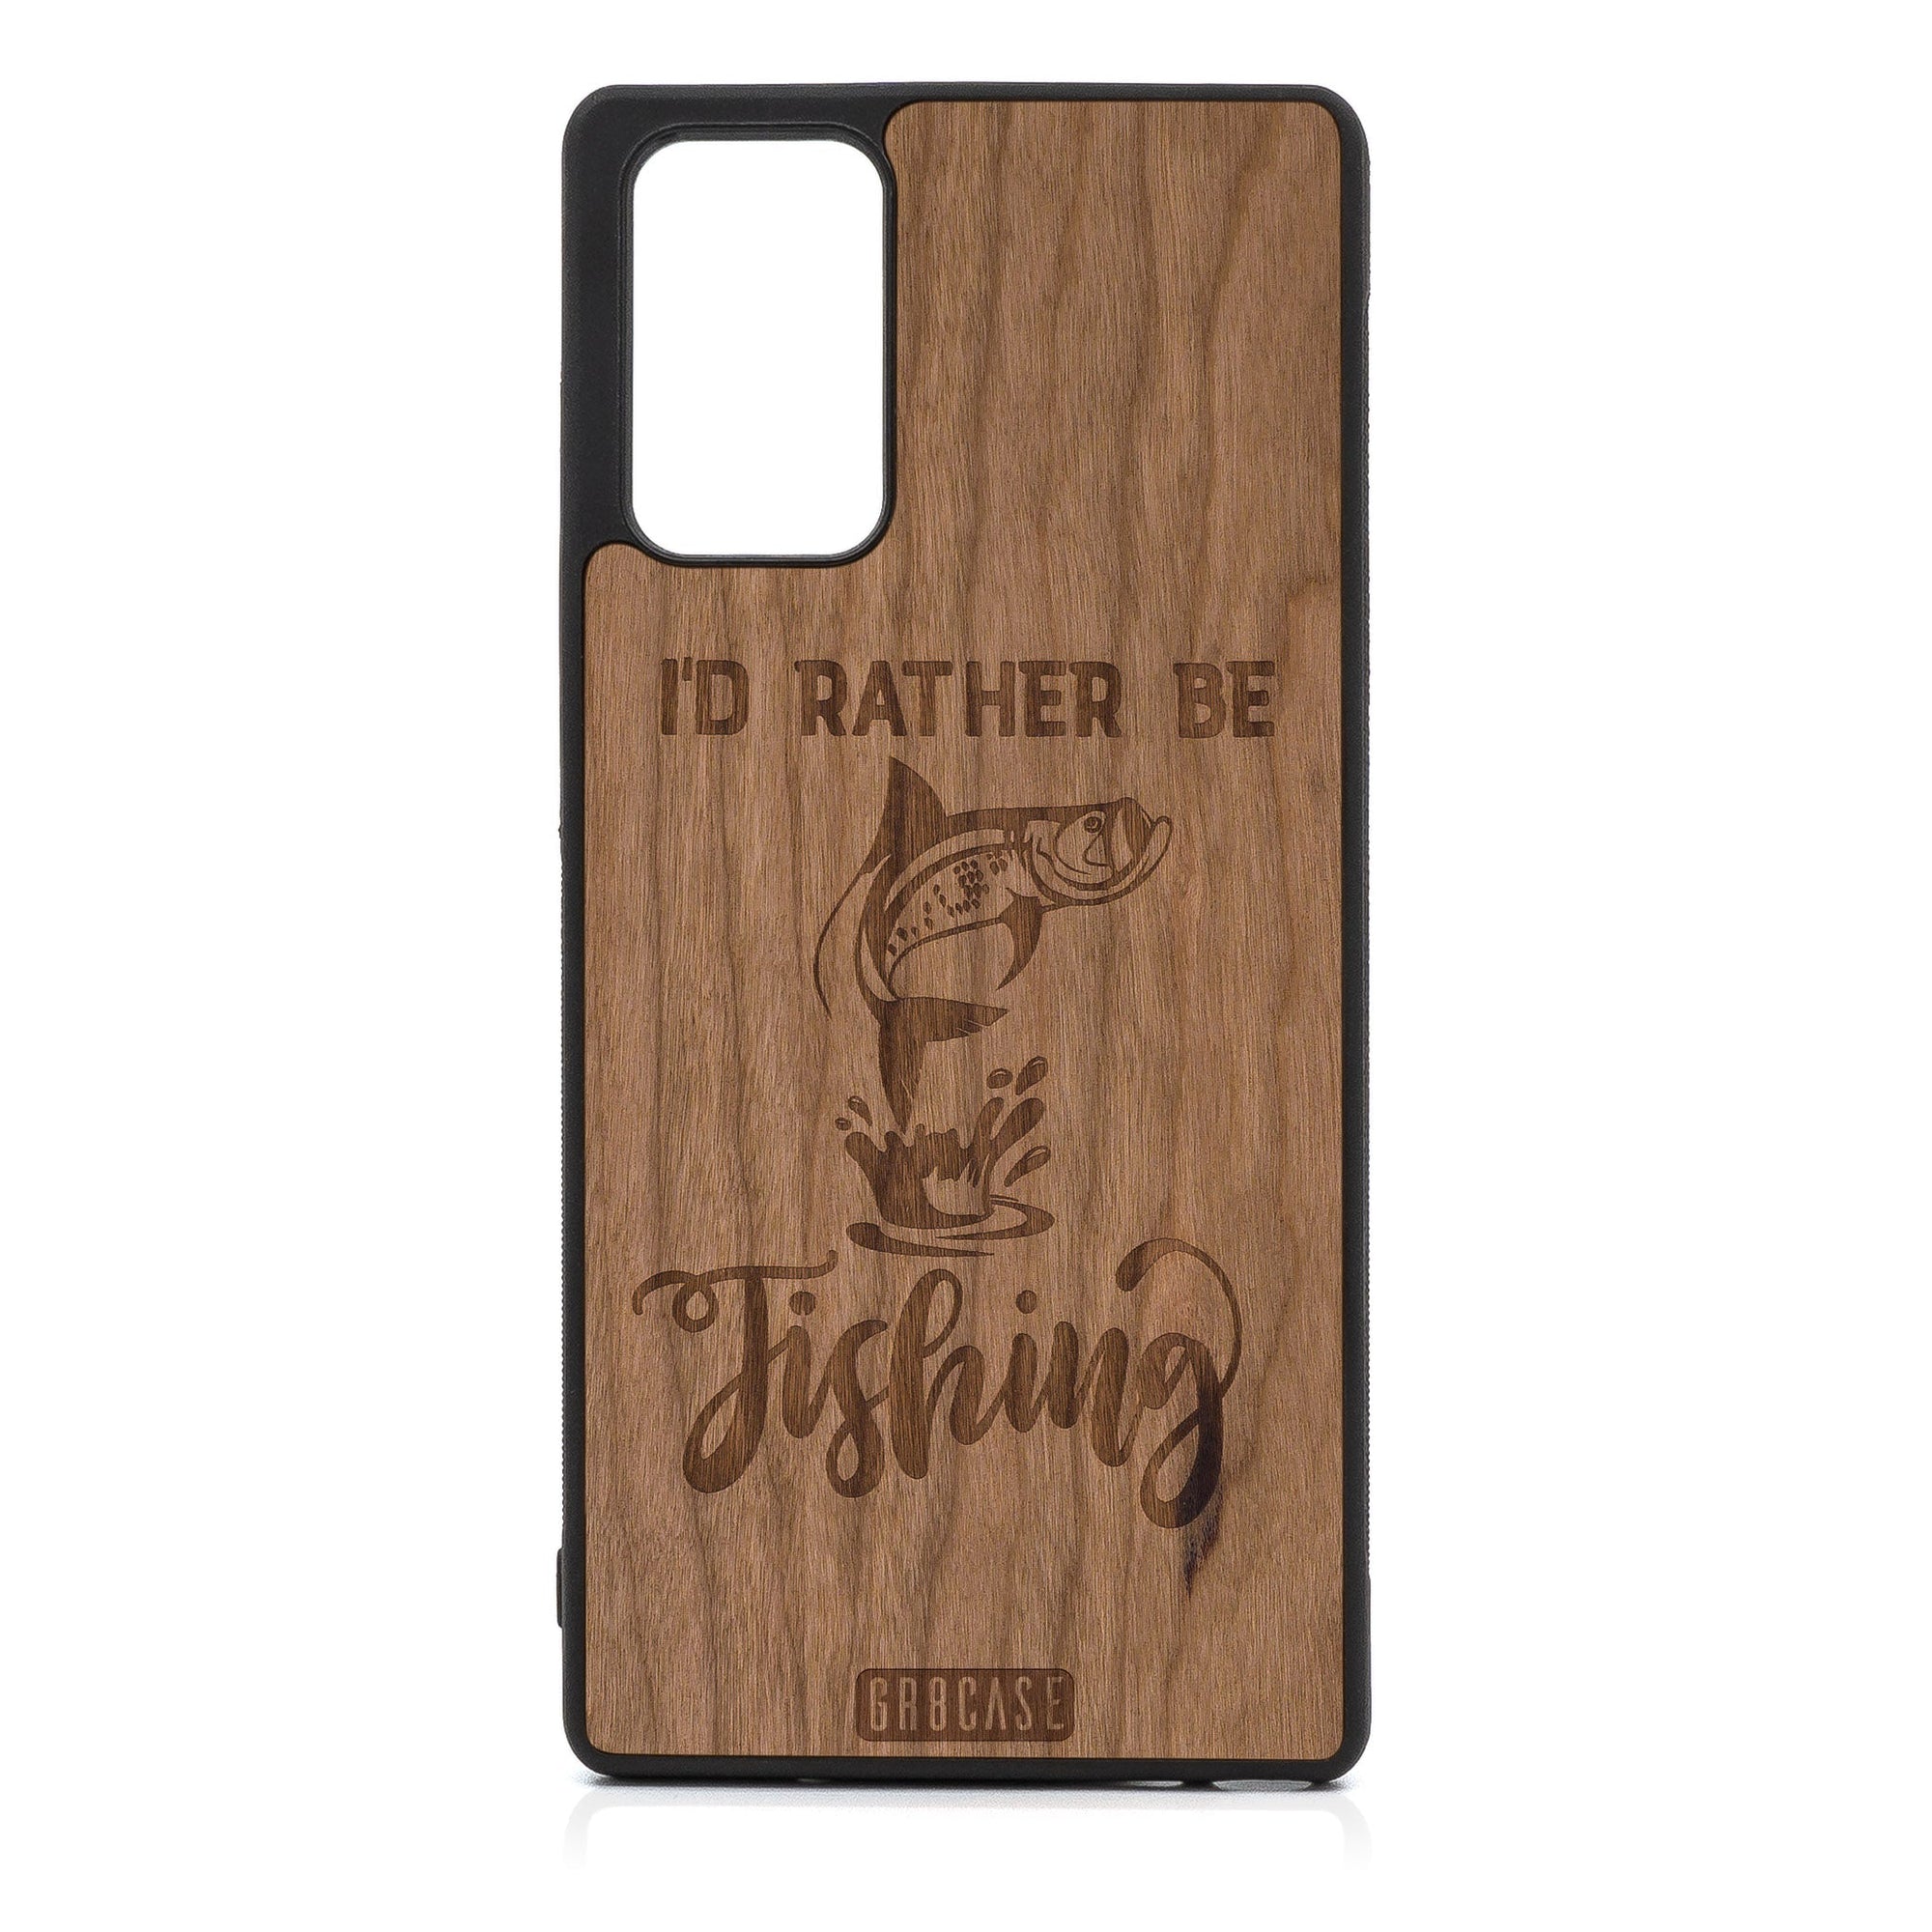 I'D Rather Be Fishing Design Wood Case For Samsung Galaxy A73 5G